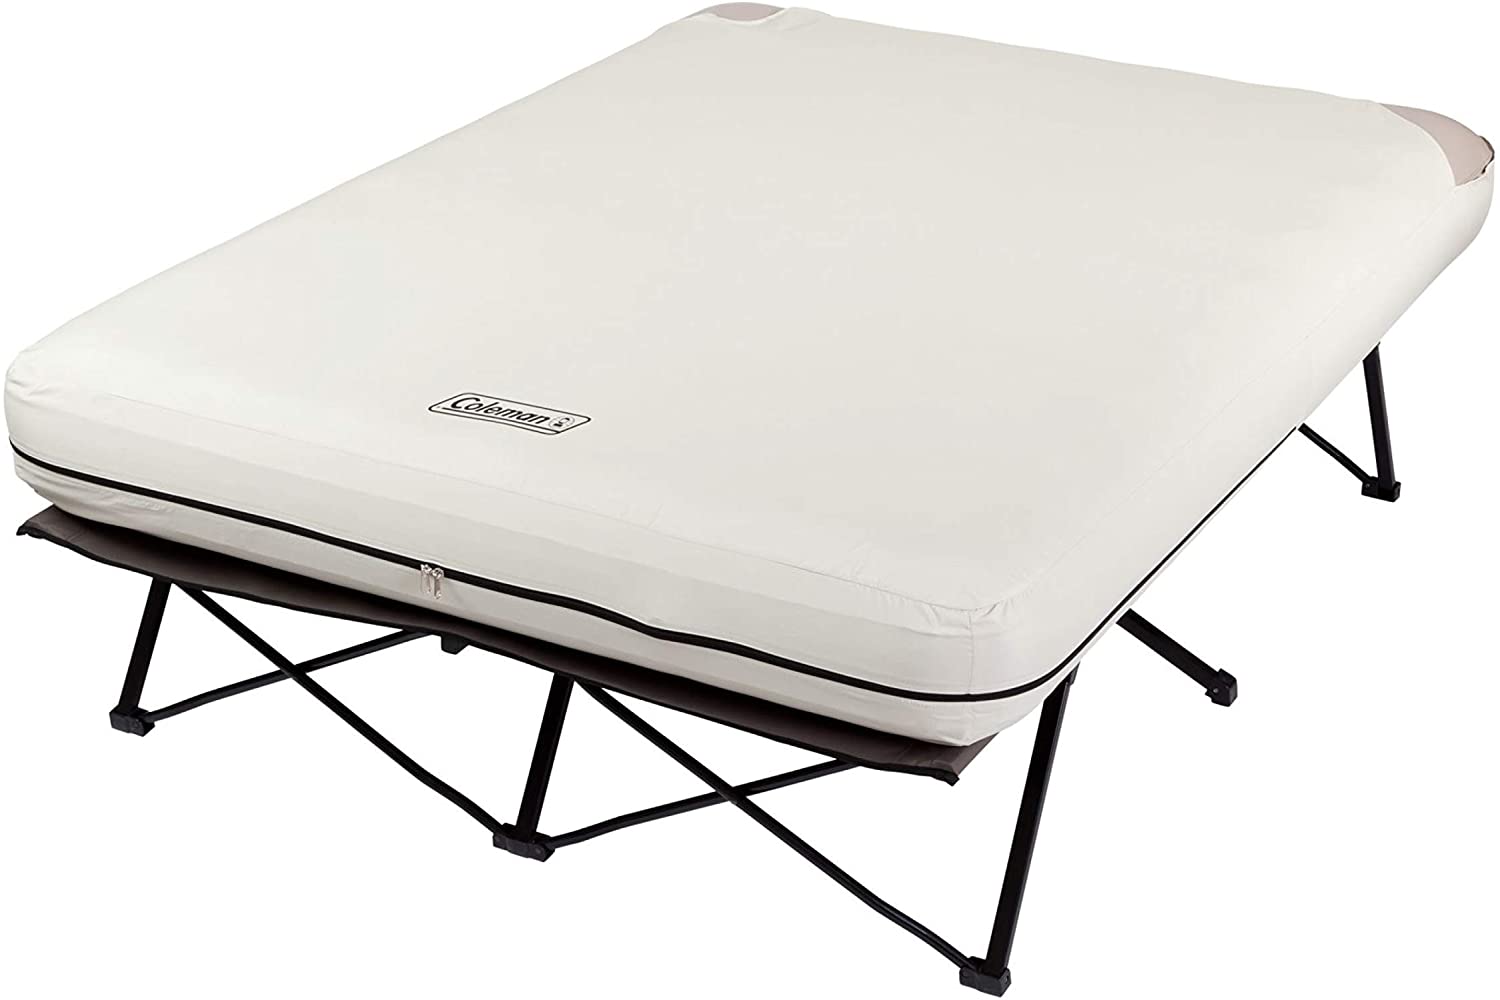 Camping cots can sleep two people and are surprisingly comfortable when combined with an air mattress. 